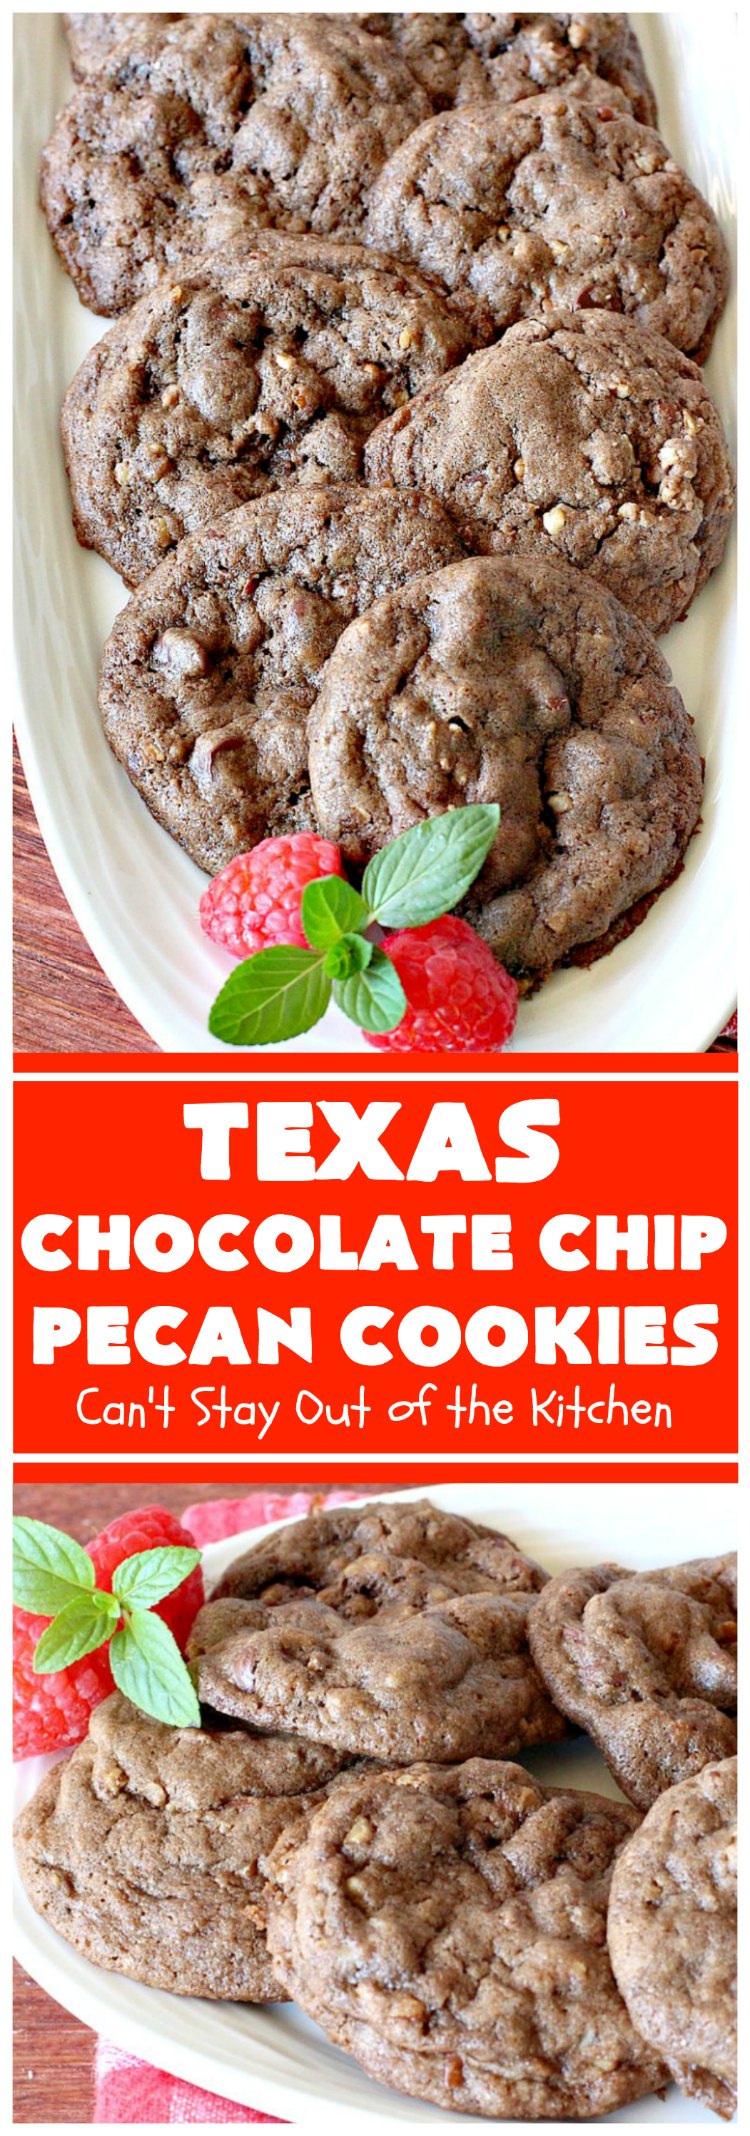 Texas Chocolate Chip Pecan Cookies | Can't Stay Out of the Kitchen